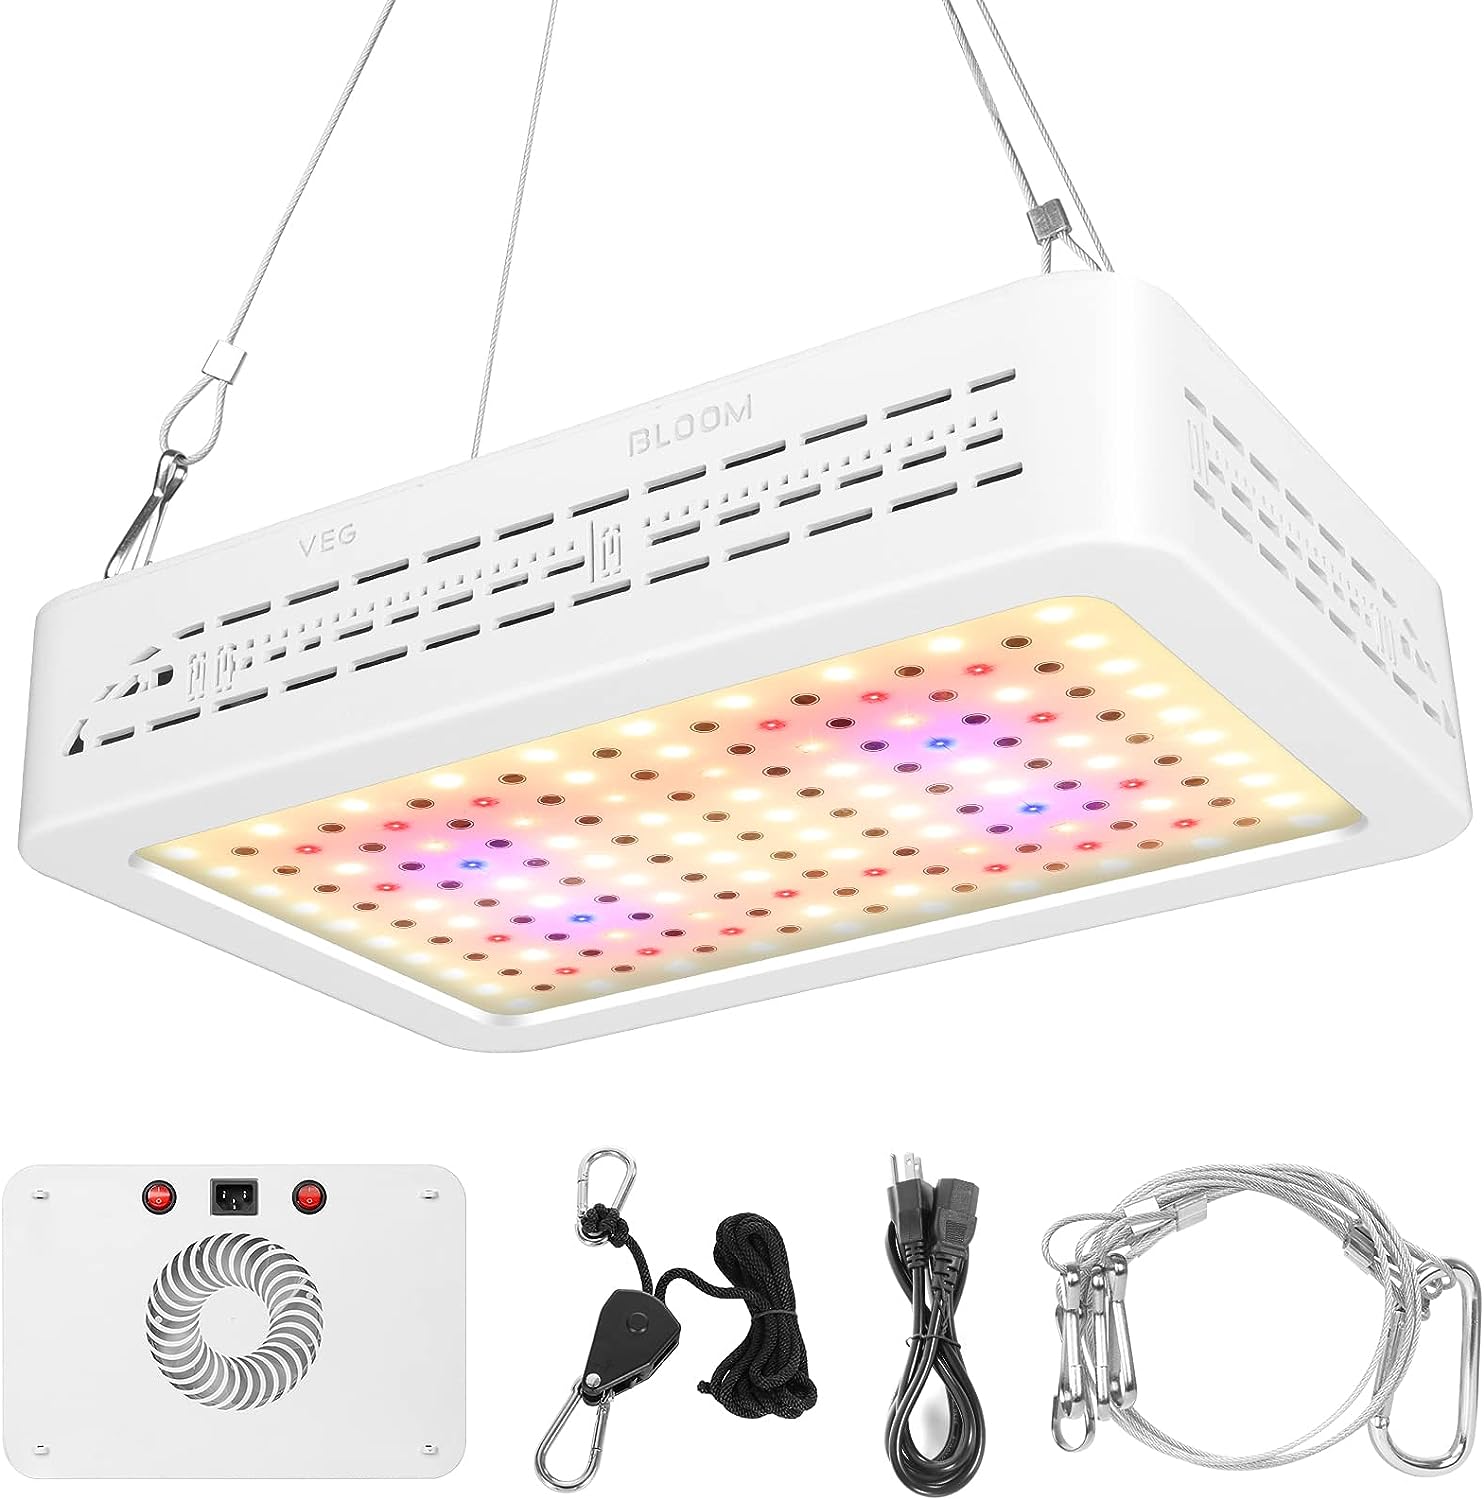 Aidyu 1000W LED Grow Light, Full Spectrum Growing Lamps for Indoor Hydroponic Greenhouse Plants with Veg and Bloom Switch, Safe, UV  IR, Adjustable Rope Hanger